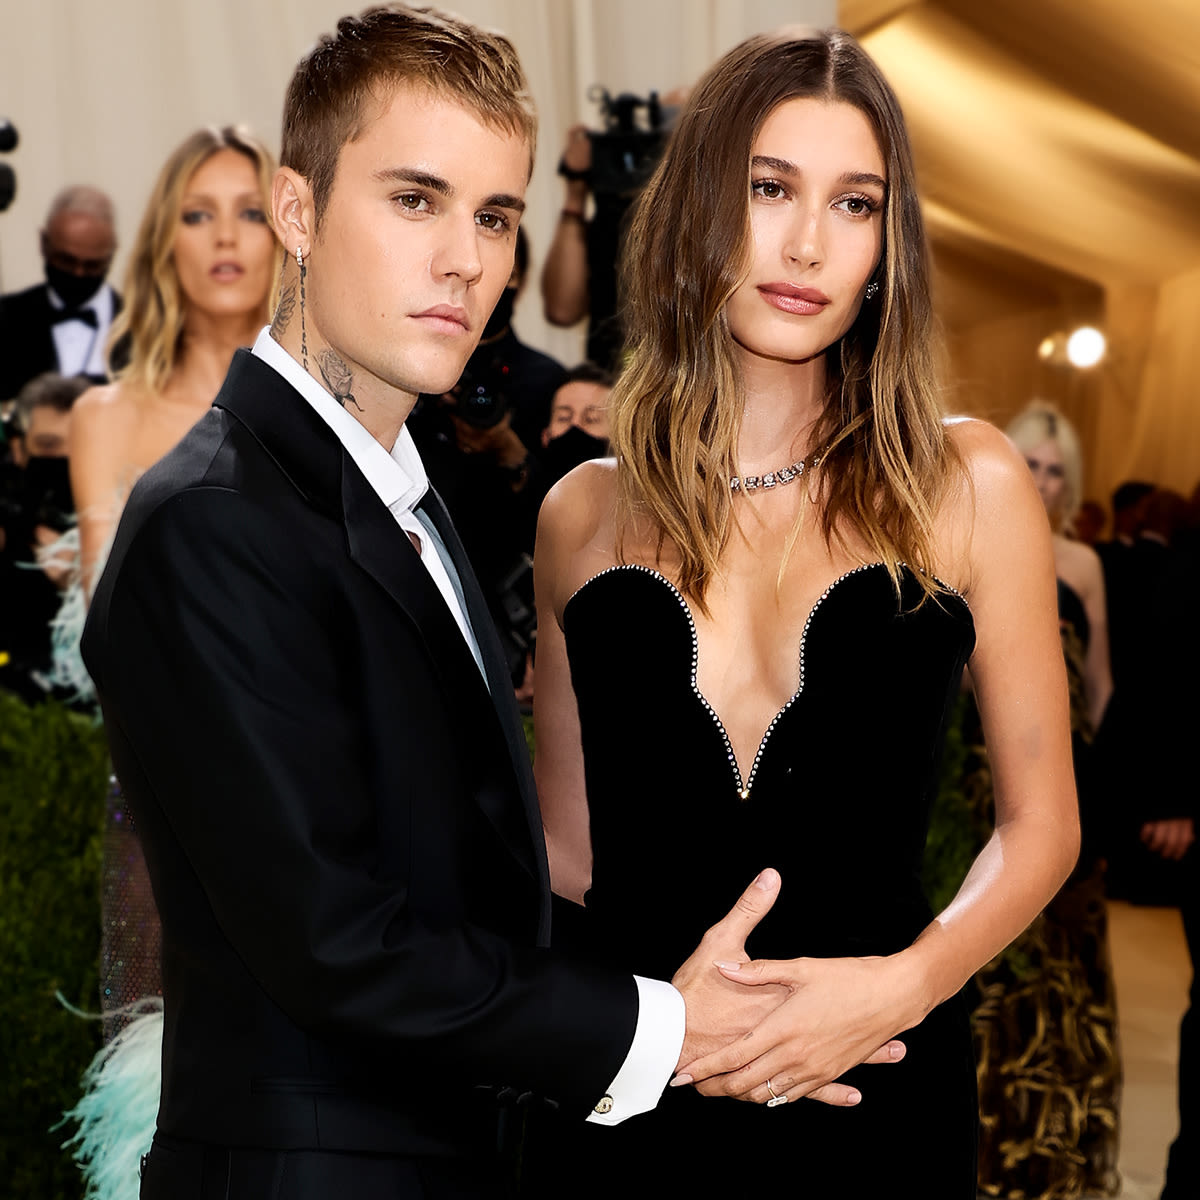 Hailey Bieber Is Pregnant, Expecting First Baby With Husband Justin Bieber - E! Online